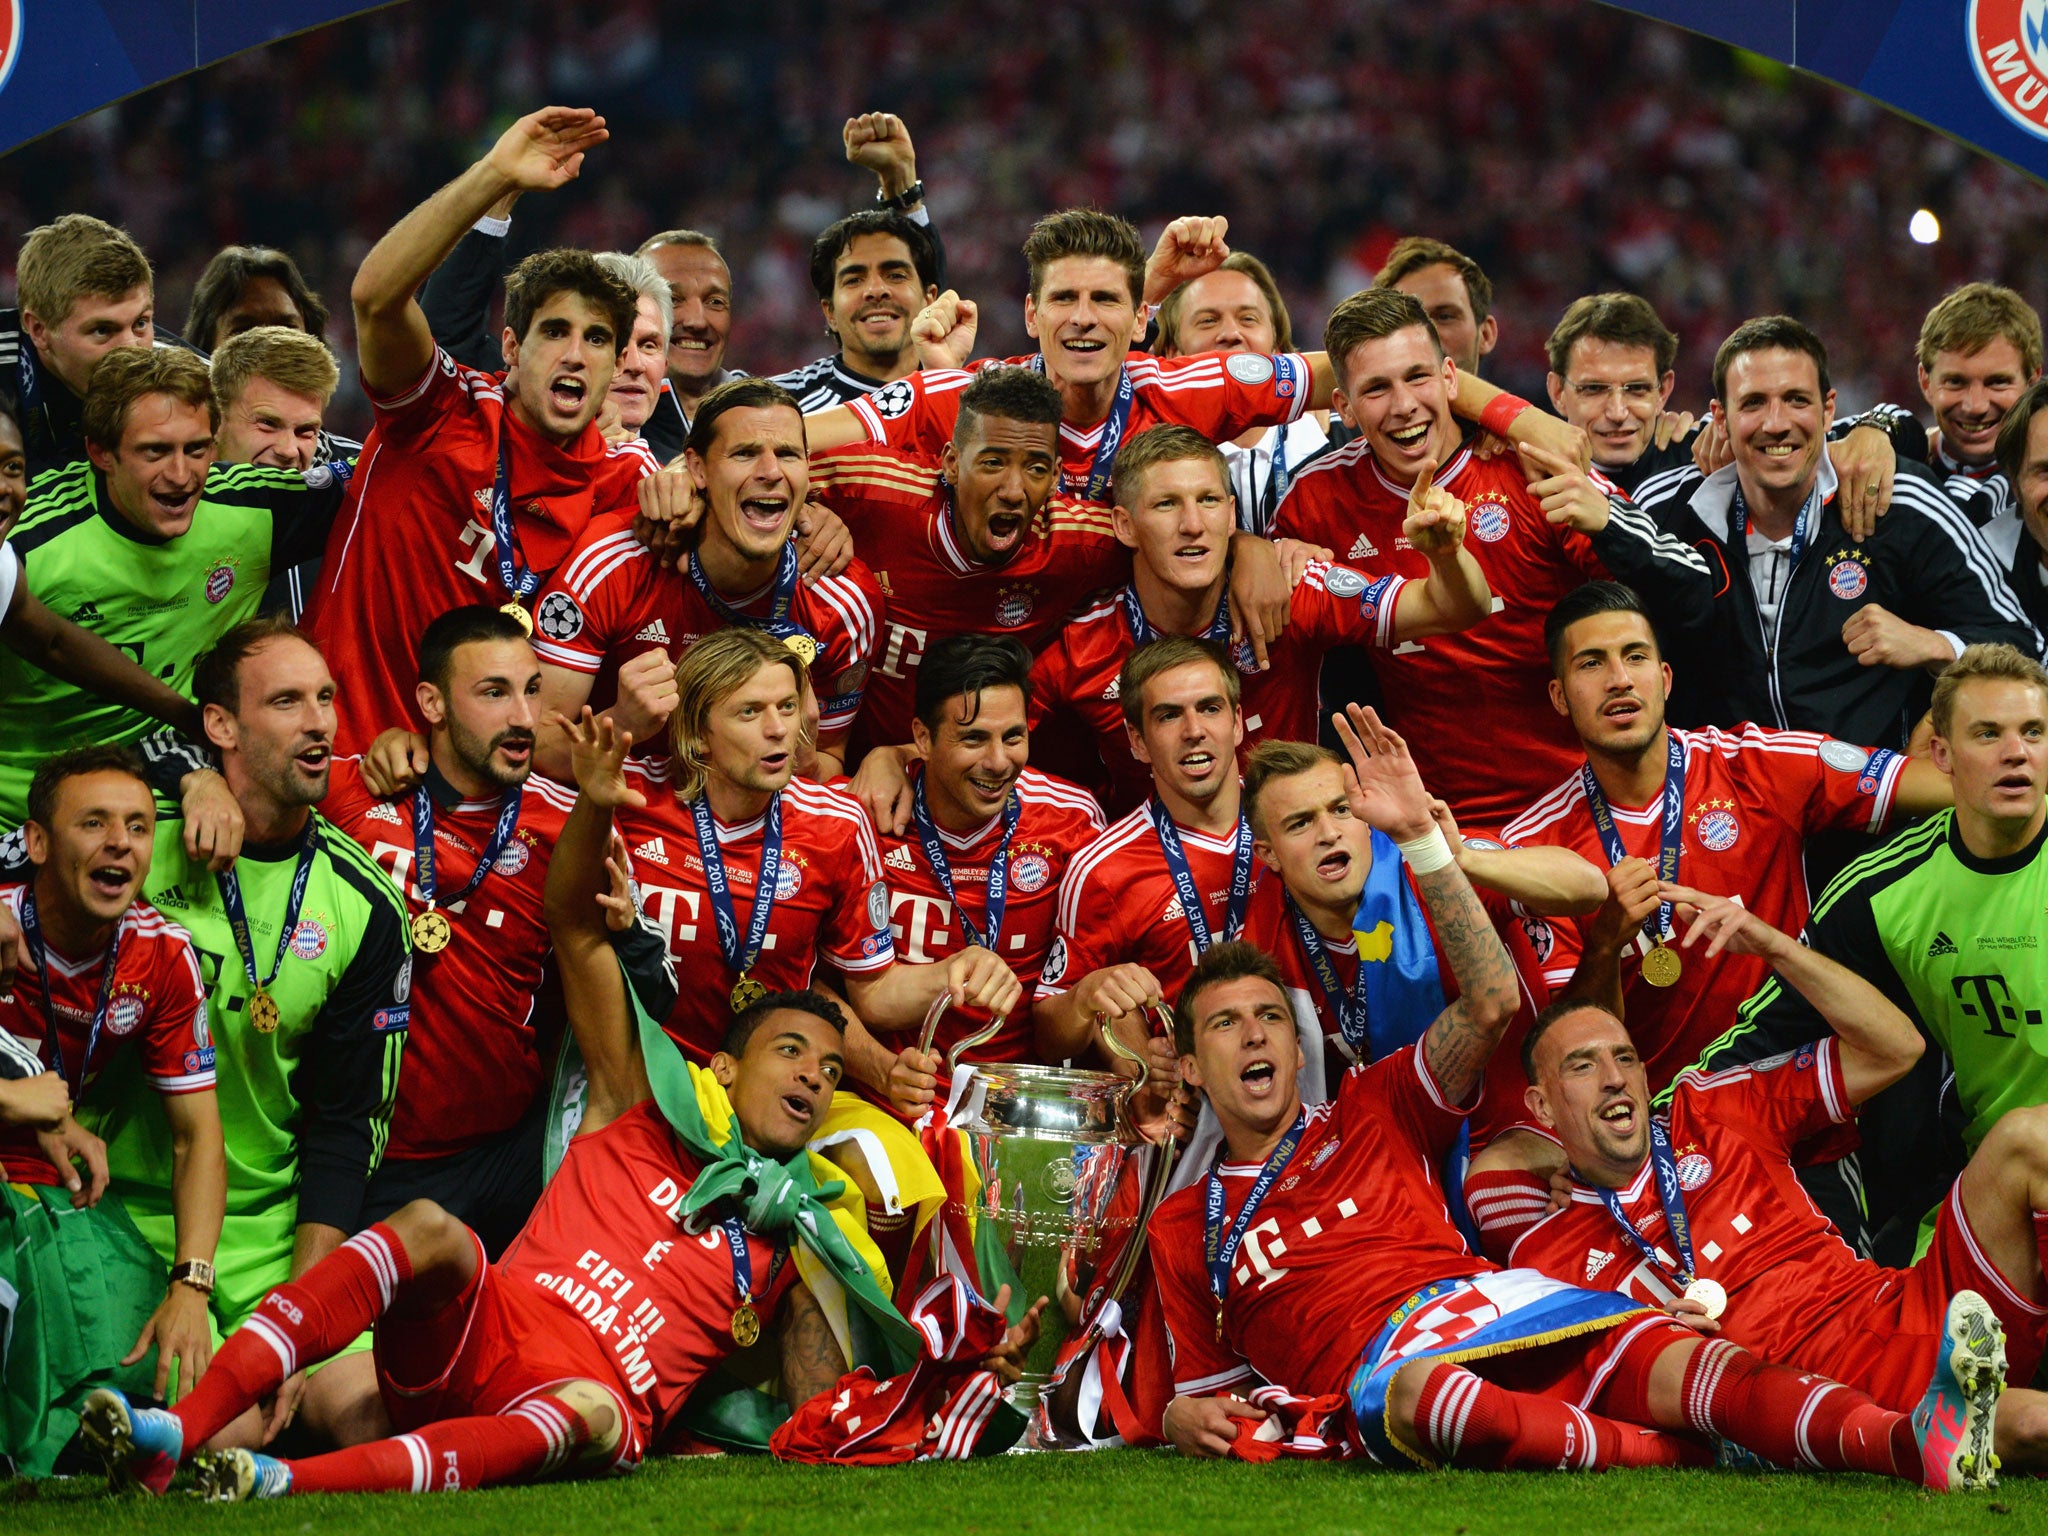 Bayern Munich celebrate with the European Cup at Wembley in May